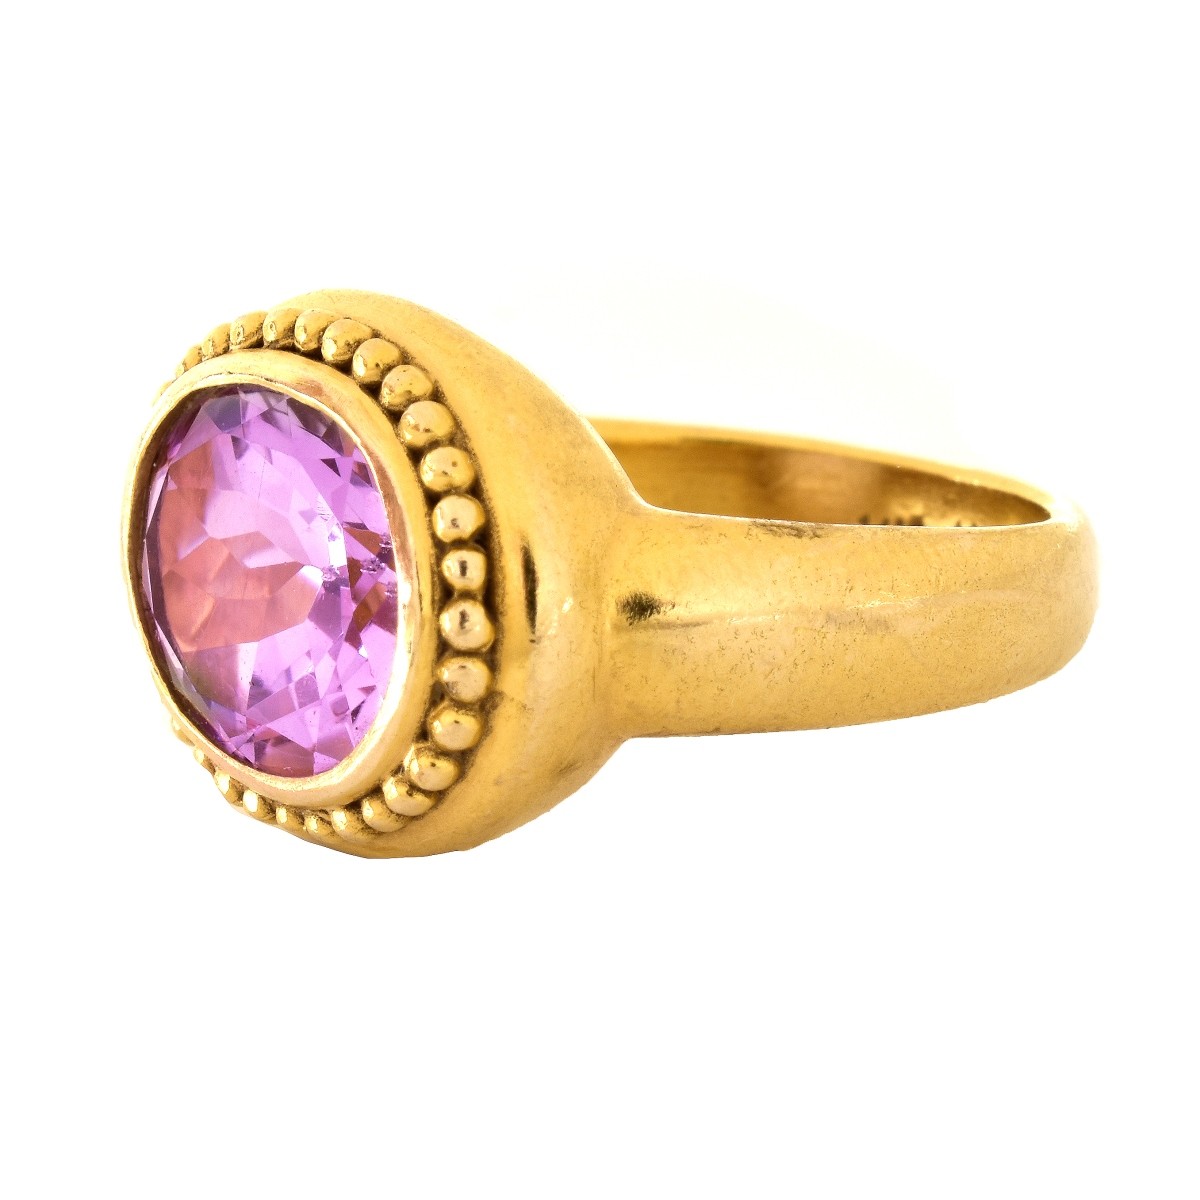 Amethyst and 14K Gold Ring - Image 3 of 7